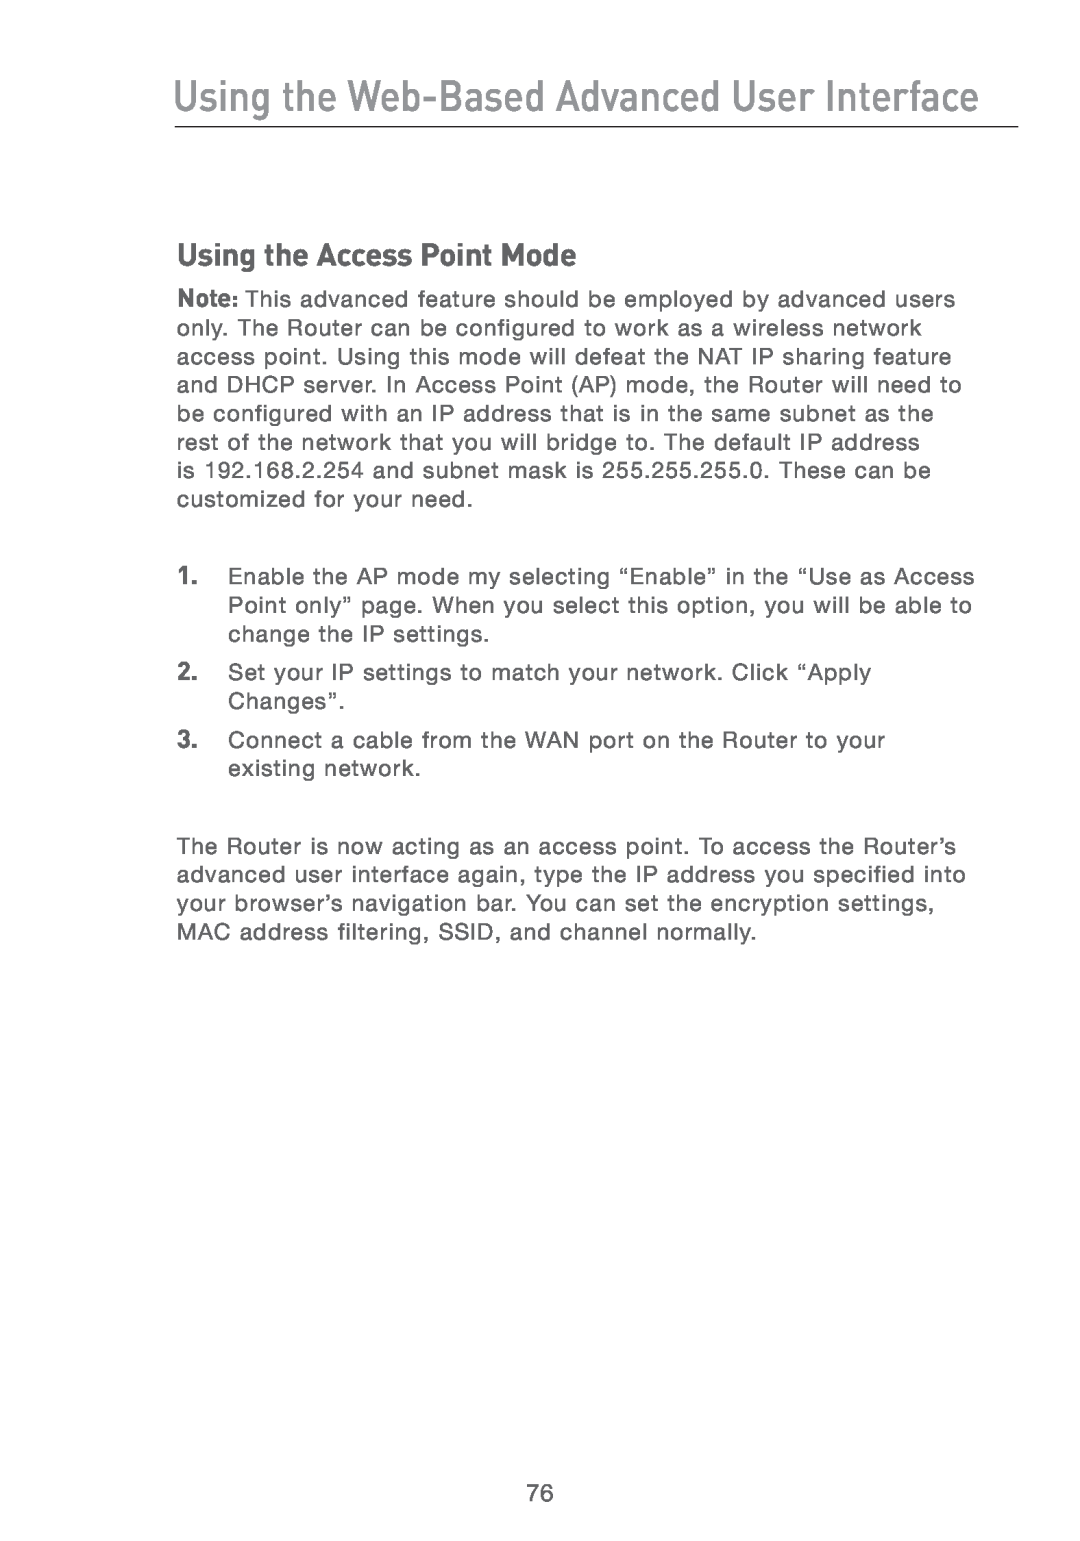 Belkin F5D7231-4P user manual Using the Access Point Mode, Using the Web-Based Advanced User Interface 